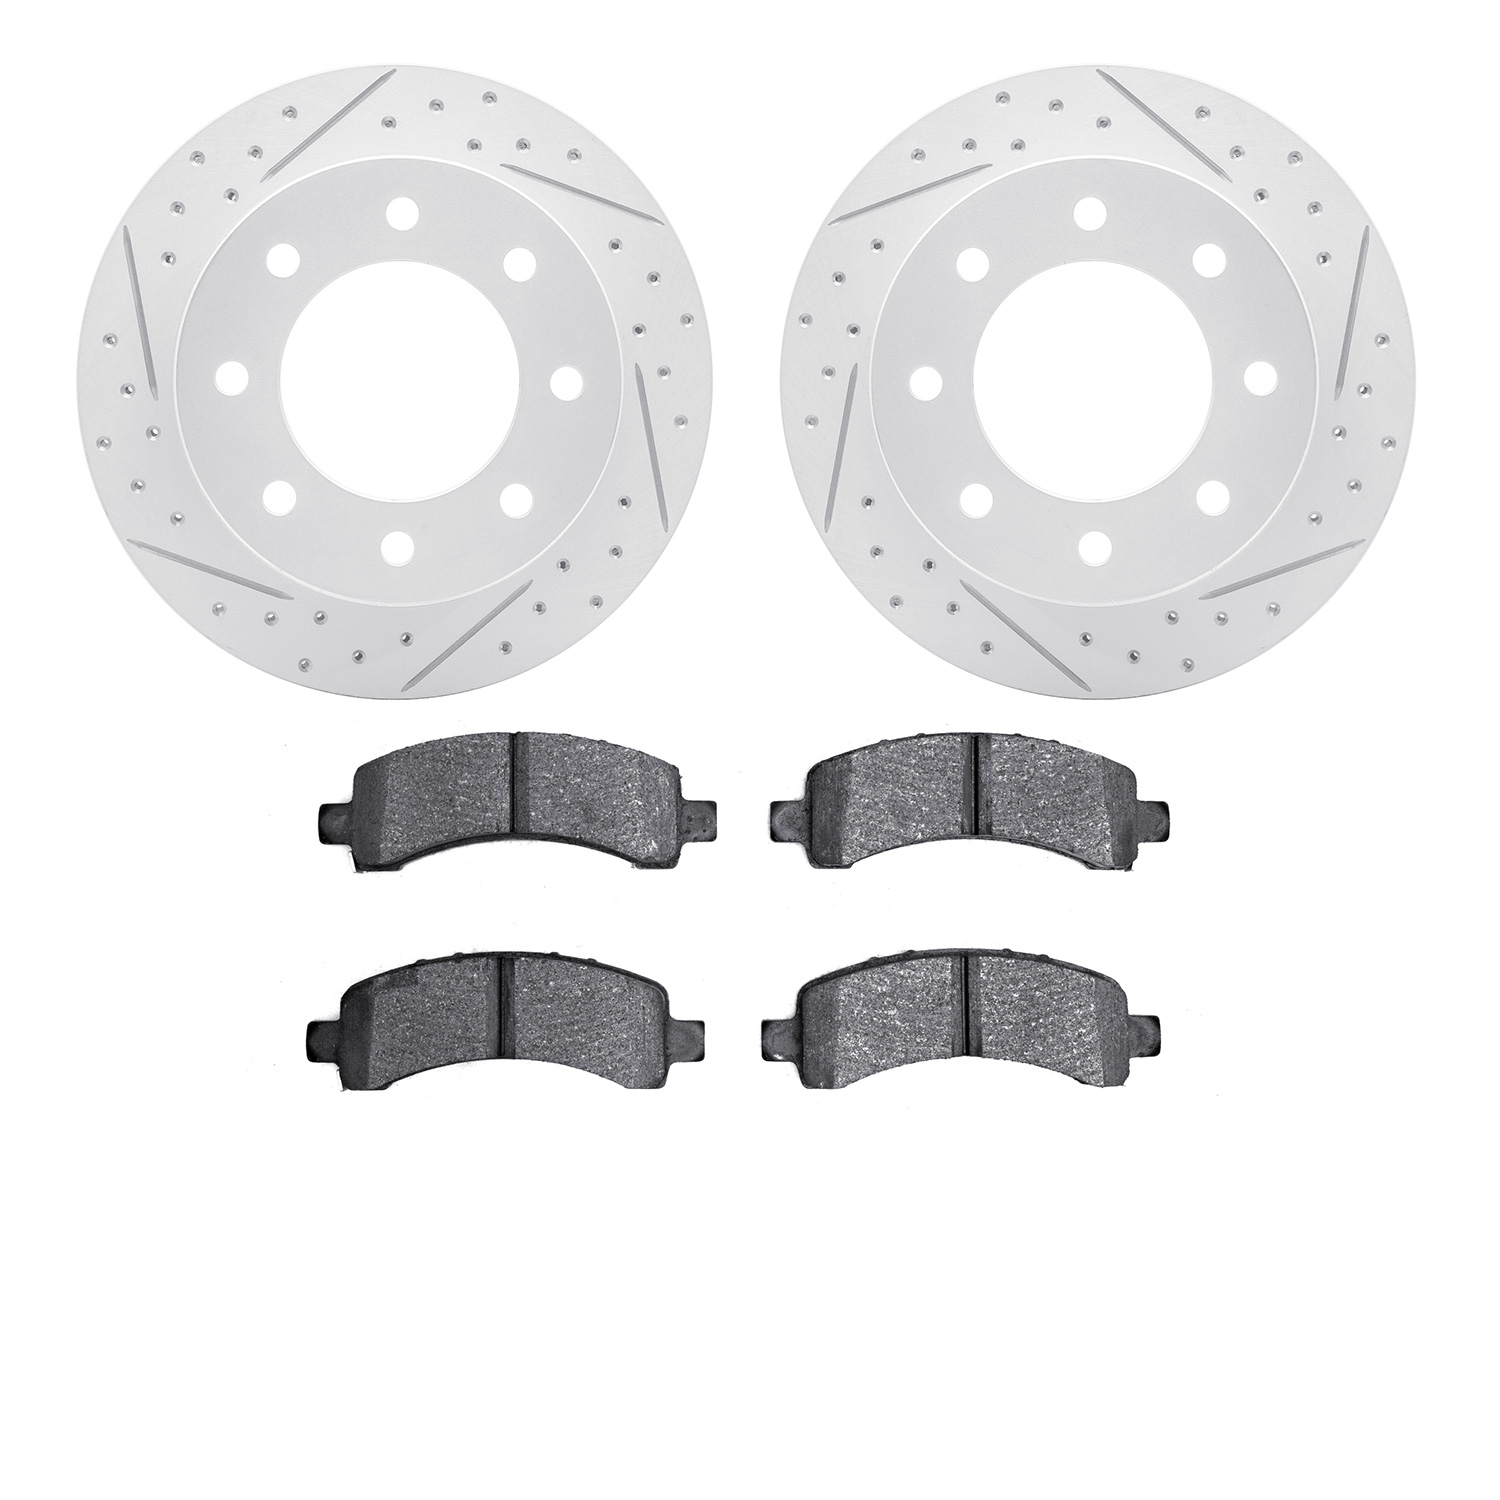 2202-48016 Geoperformance Drilled/Slotted Rotors w/Heavy-Duty Pads Kit, 2003-2020 GM, Position: Rear